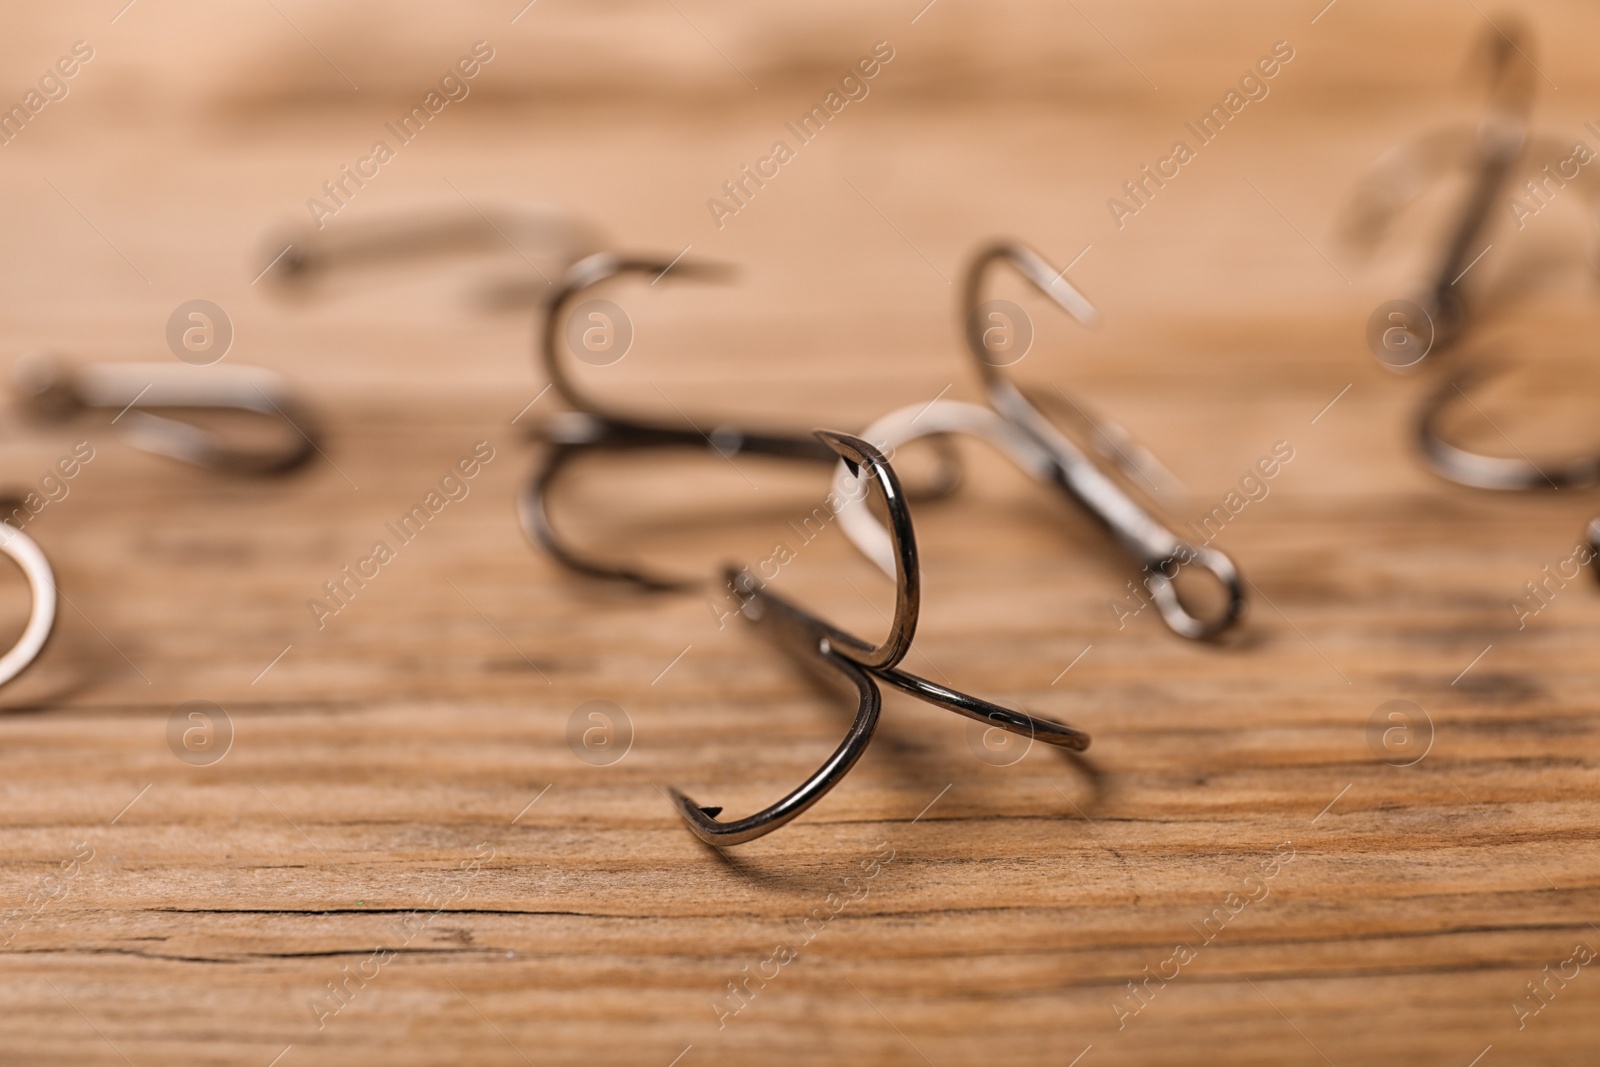 Photo of Fishing hooks on wooden table. Angling equipment